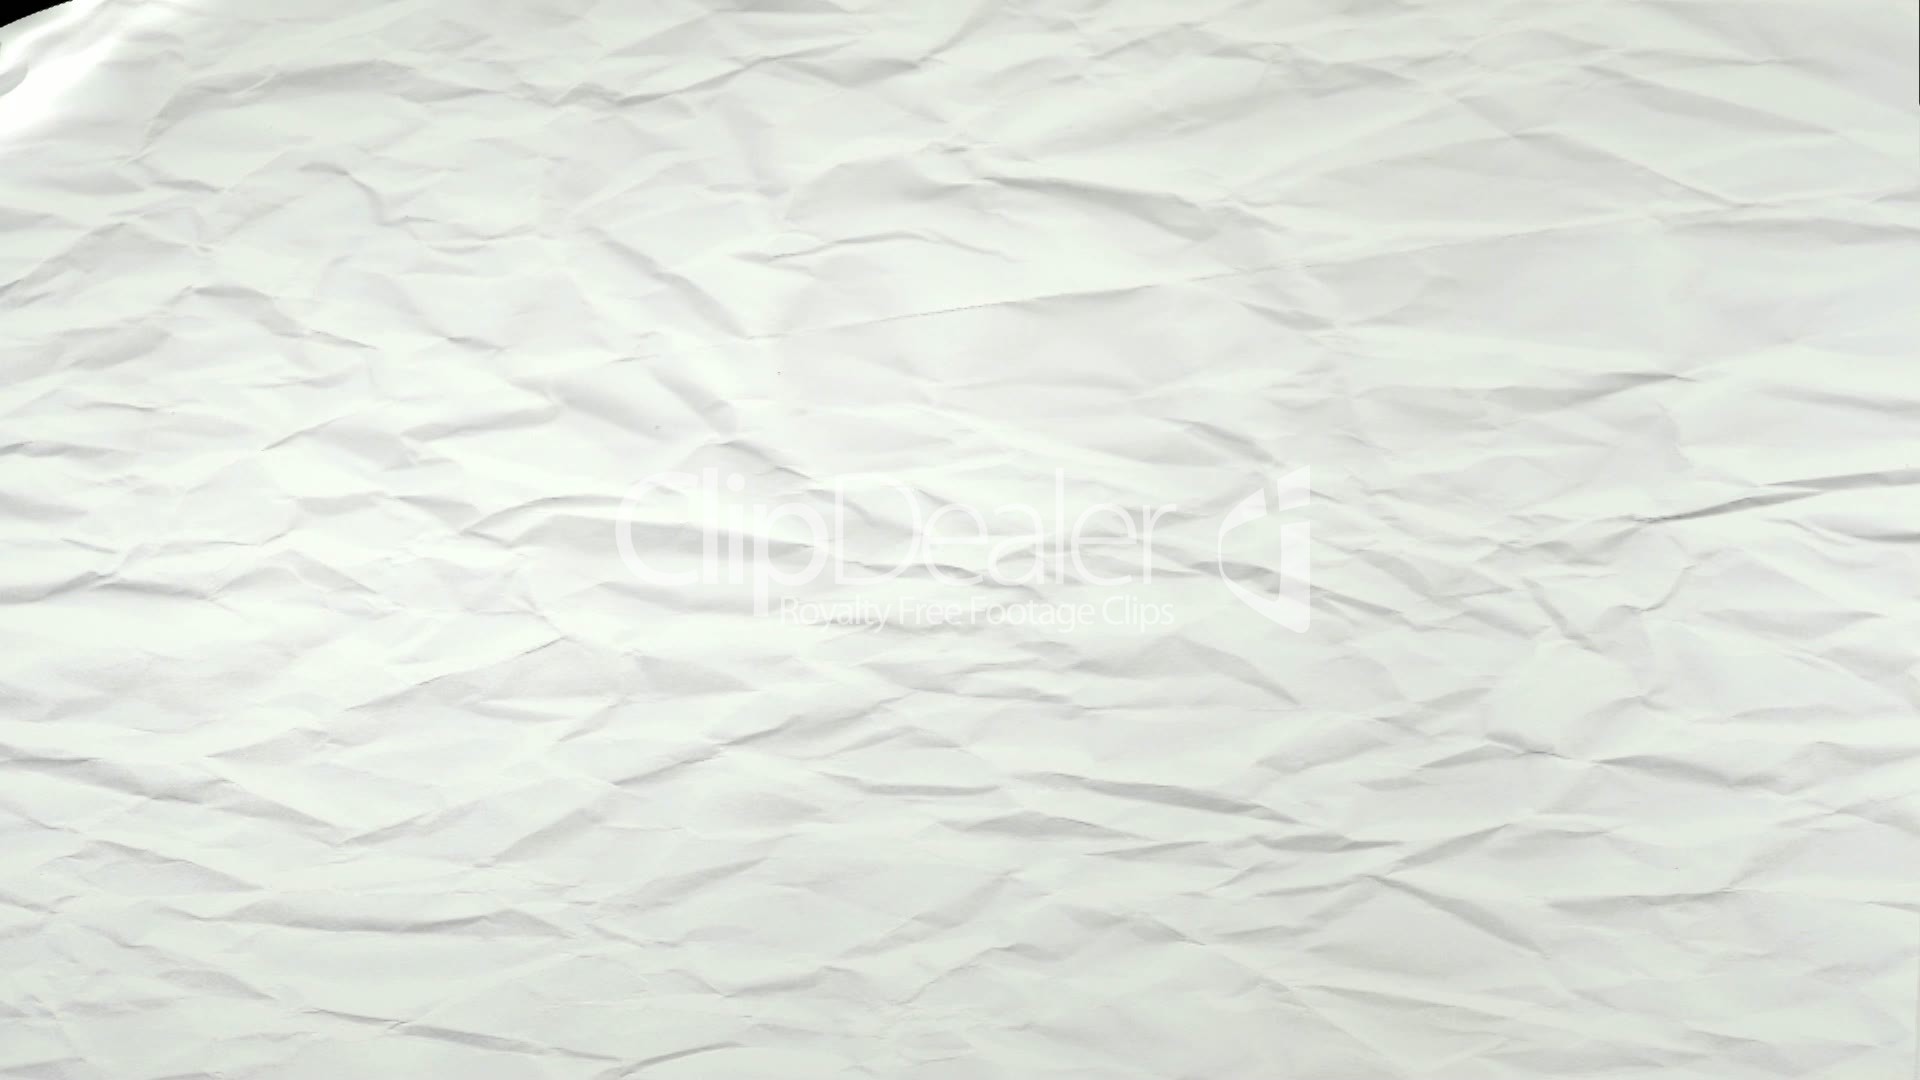 Crumpled paper page curl: Royalty-free video and stock footage